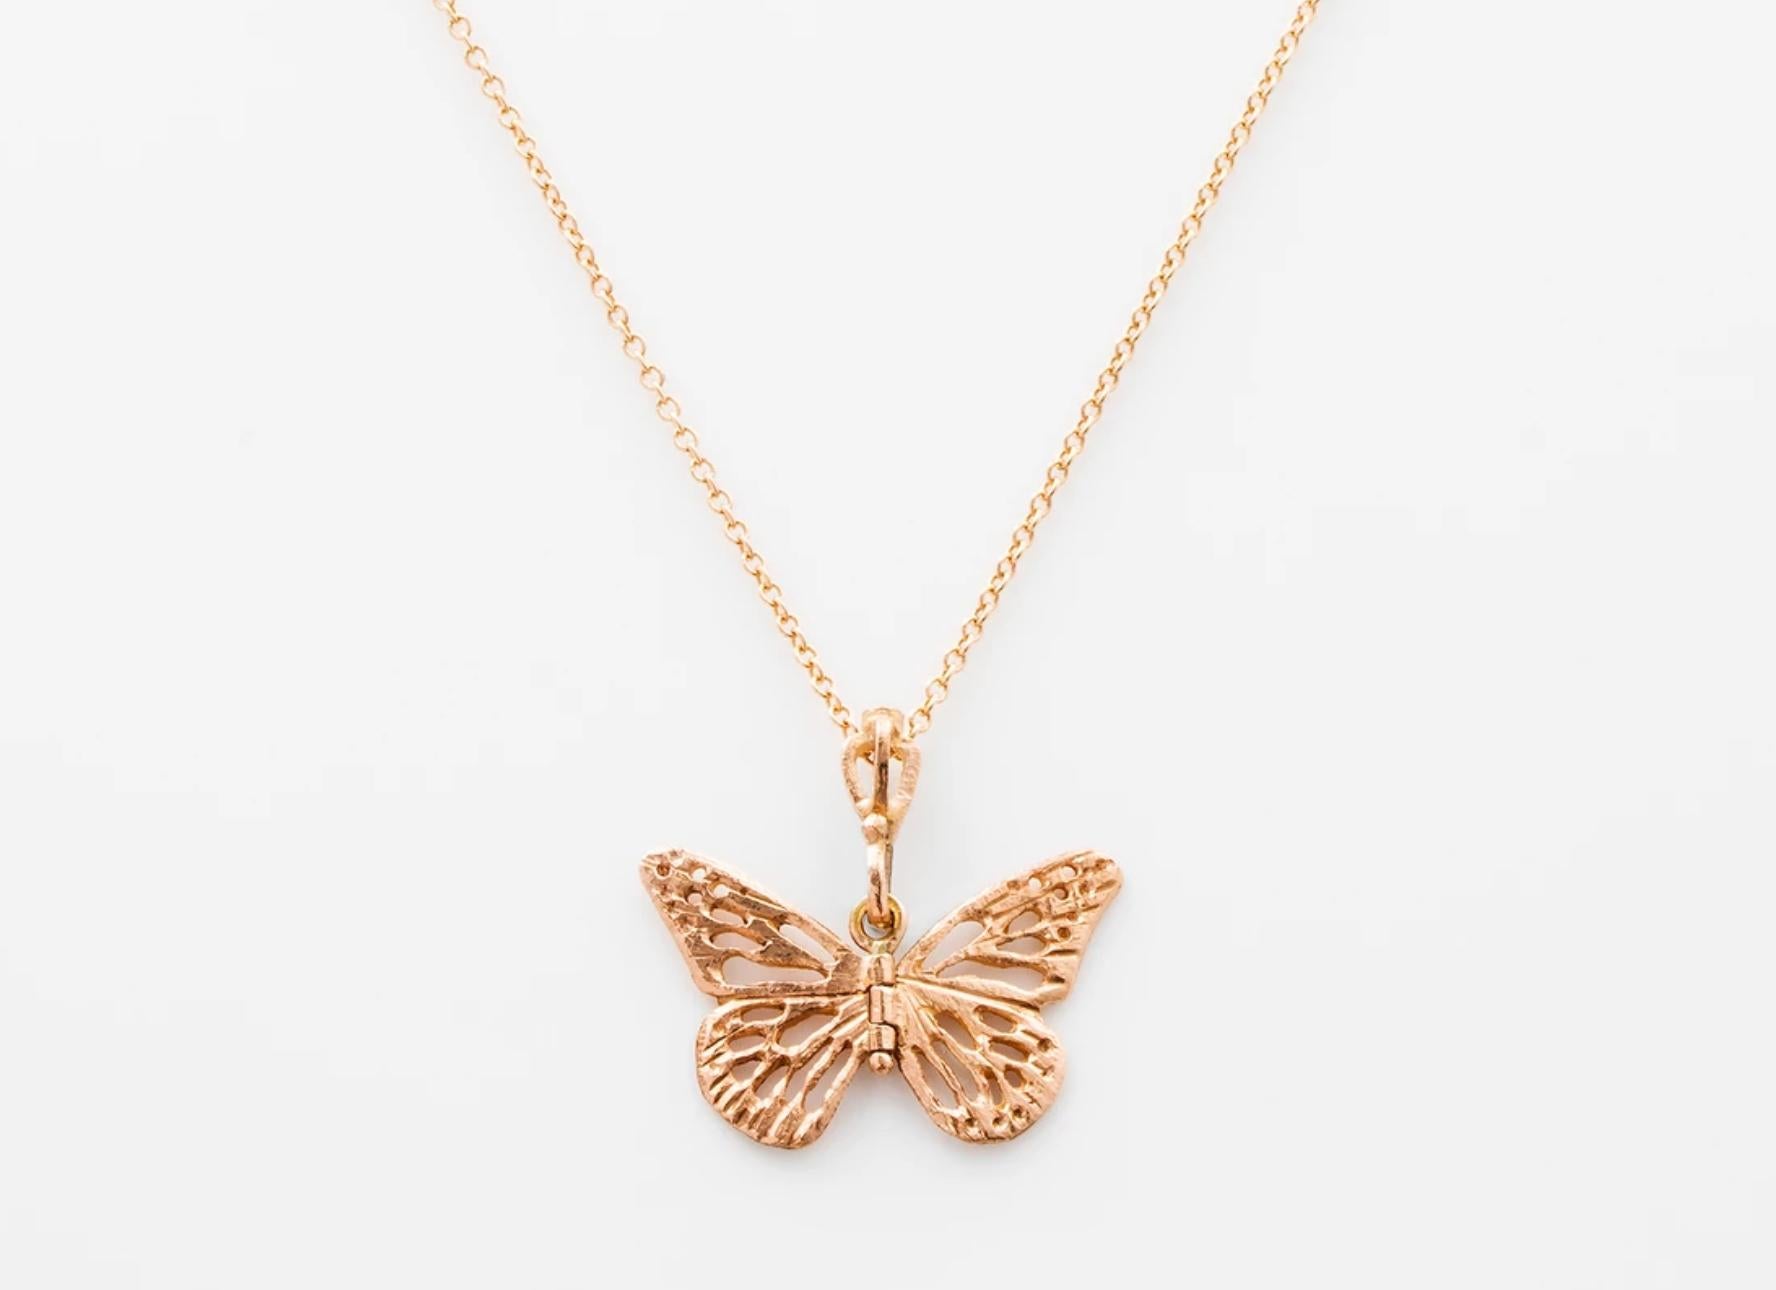 James Banks's signature butterfly necklace features a Baby Monarch species butterfly with a hinge at the center to allow movement of the wings, set in 14k Rose Gold with a lace cut out design and hung on a 14k Rose Gold Chain with a secure clasp